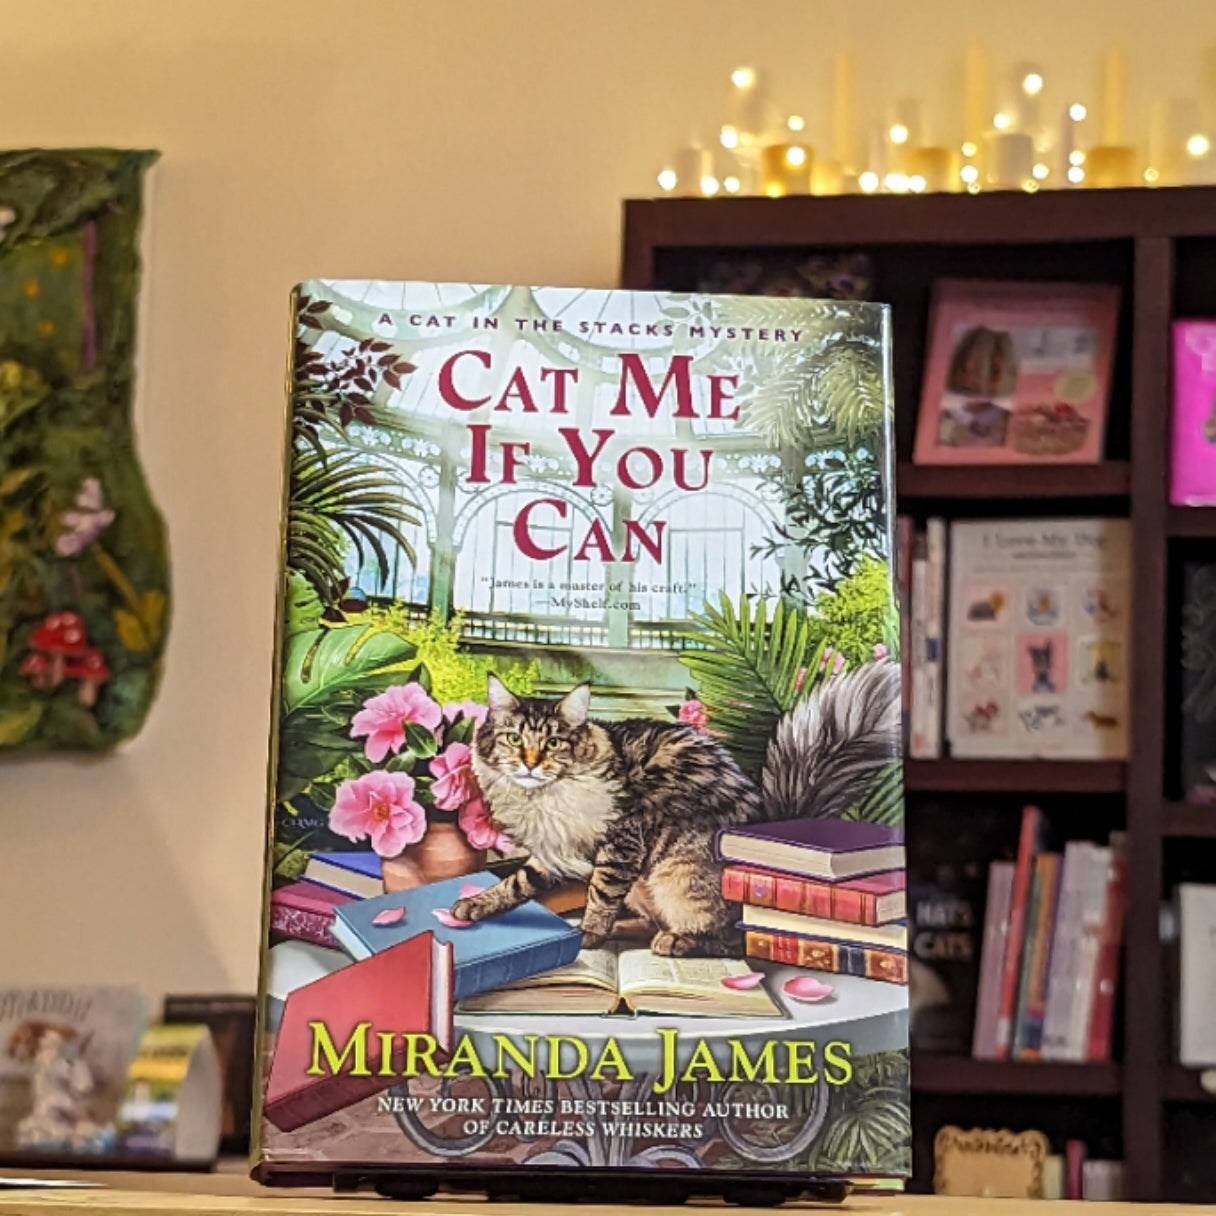 Cat Me If You Can (Cat in the Stacks Mystery)